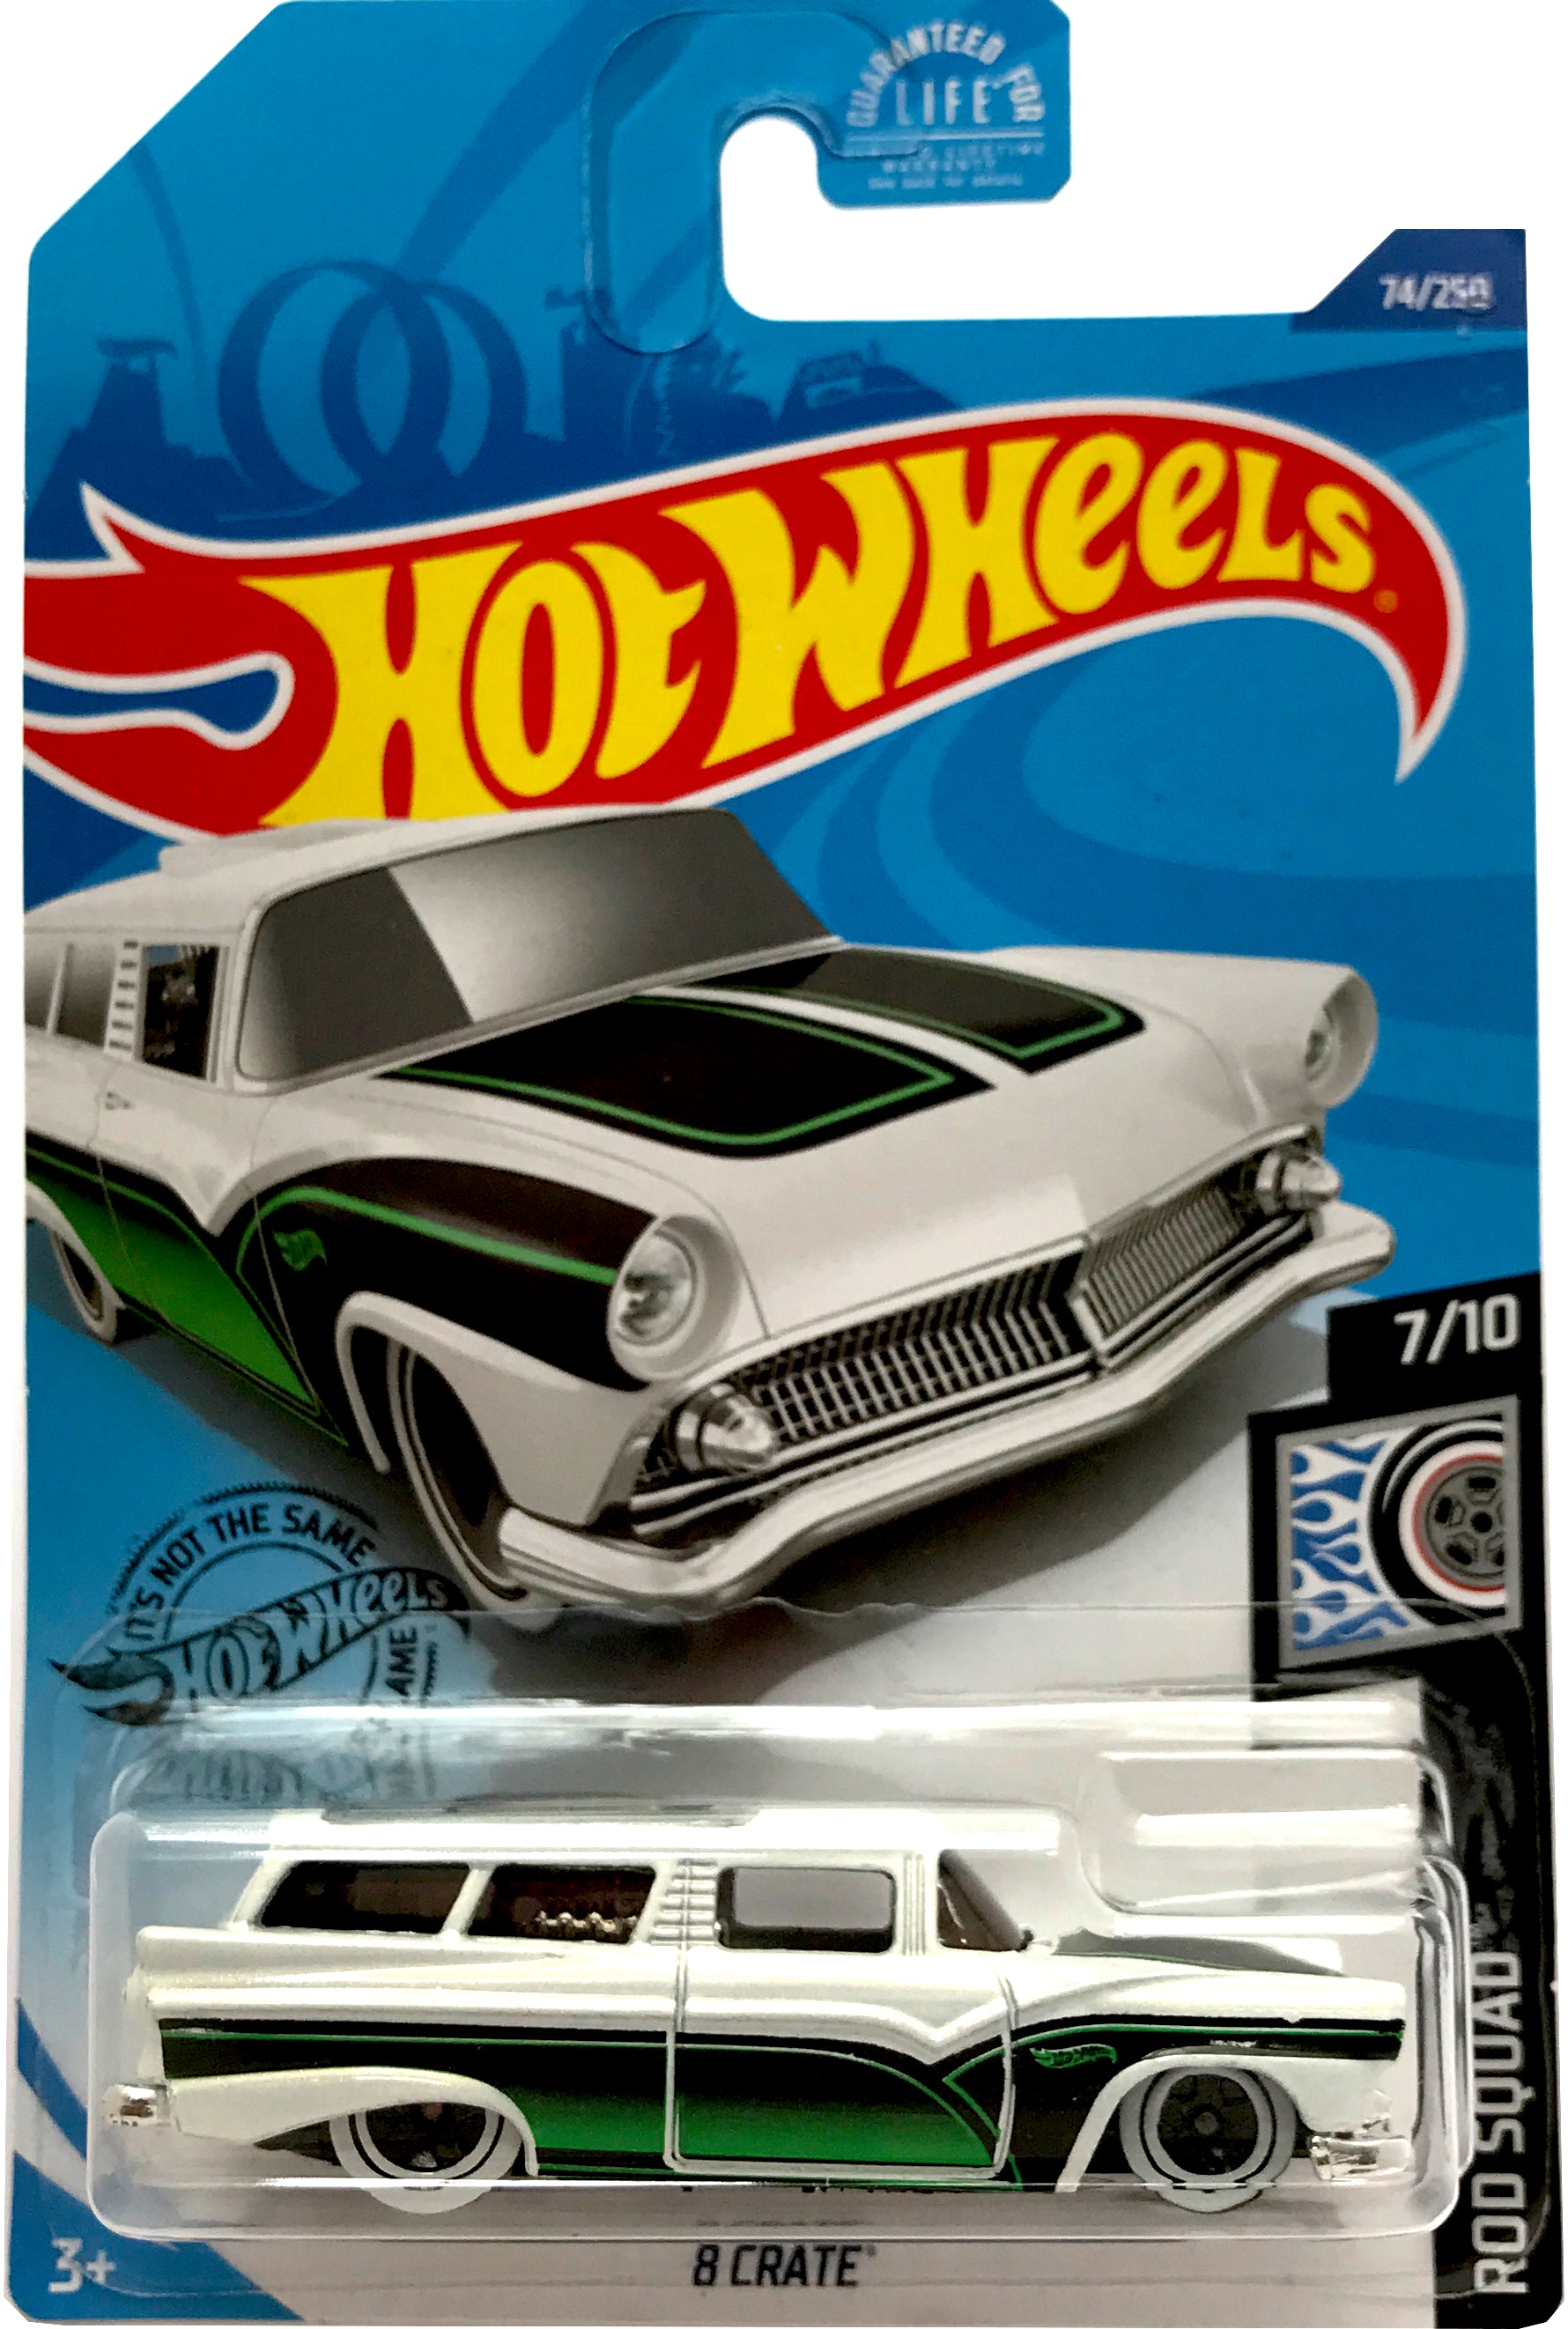 2020 Hot Wheels Mainline #074 - 8 Crate '55 Ford Ranch Wagon (White) GHF74